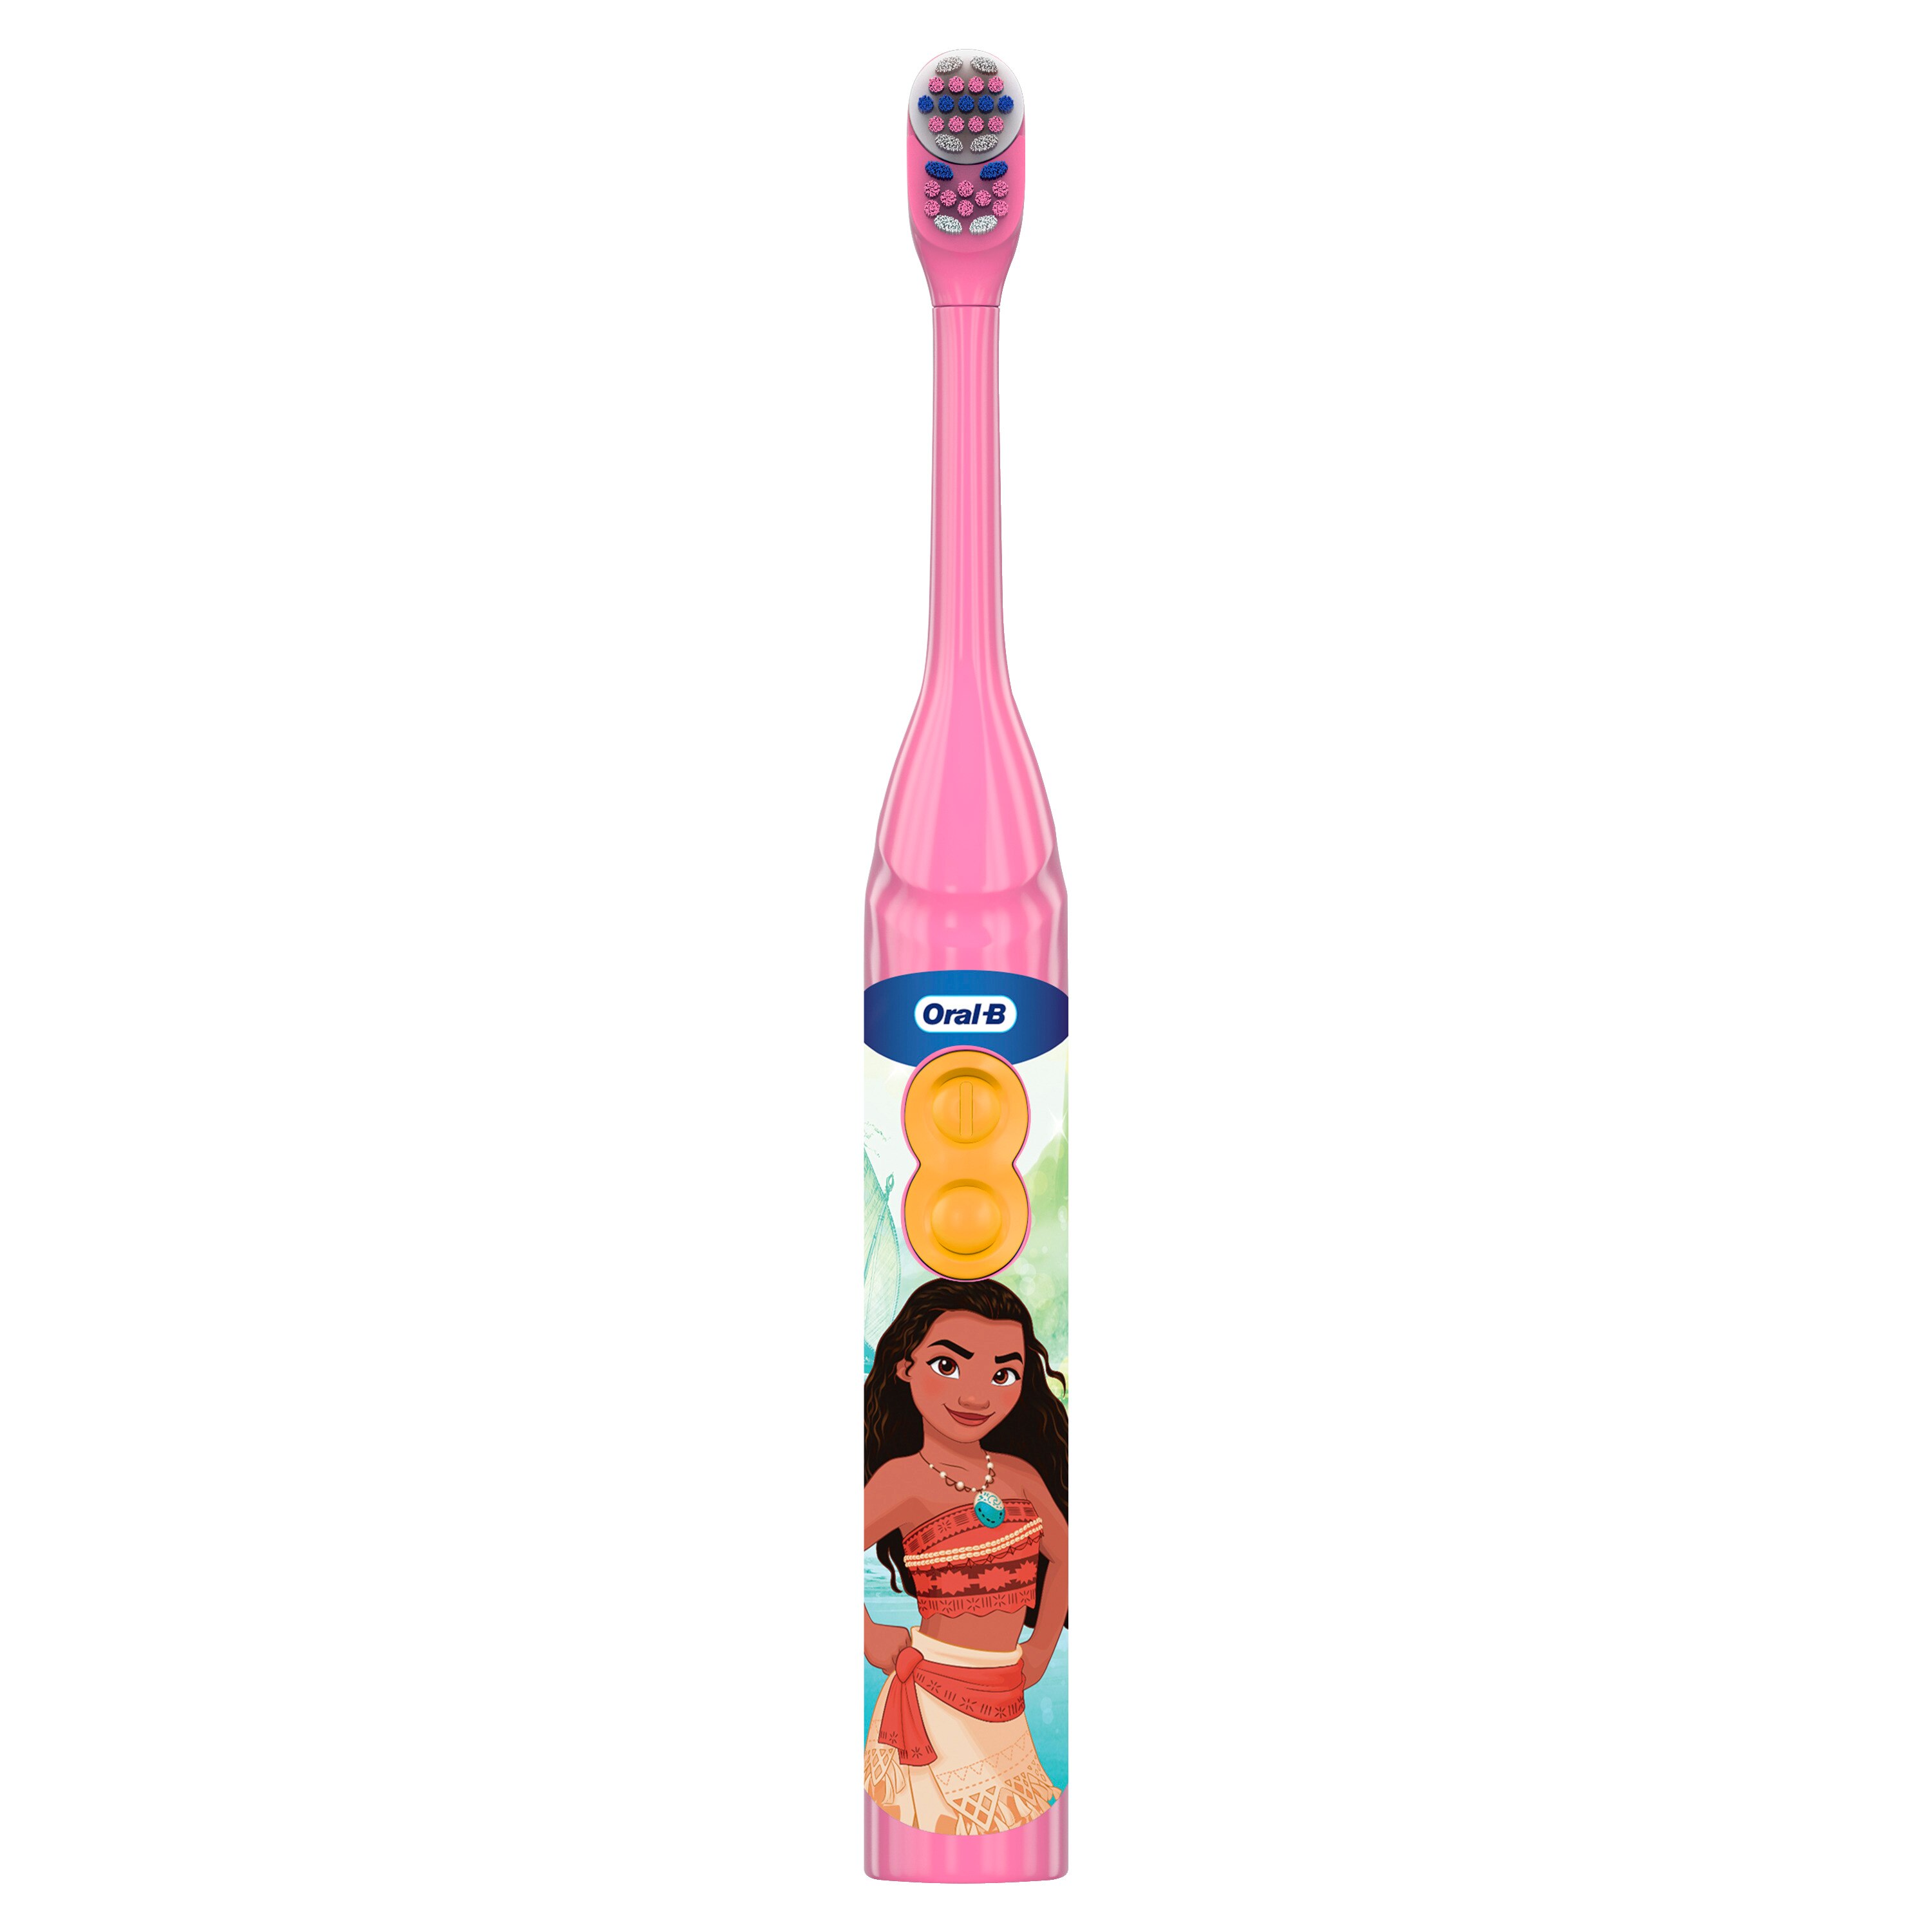 Oral-B Kids Disney Princess Power Toothbrush for ages 3+, Soft Bristle